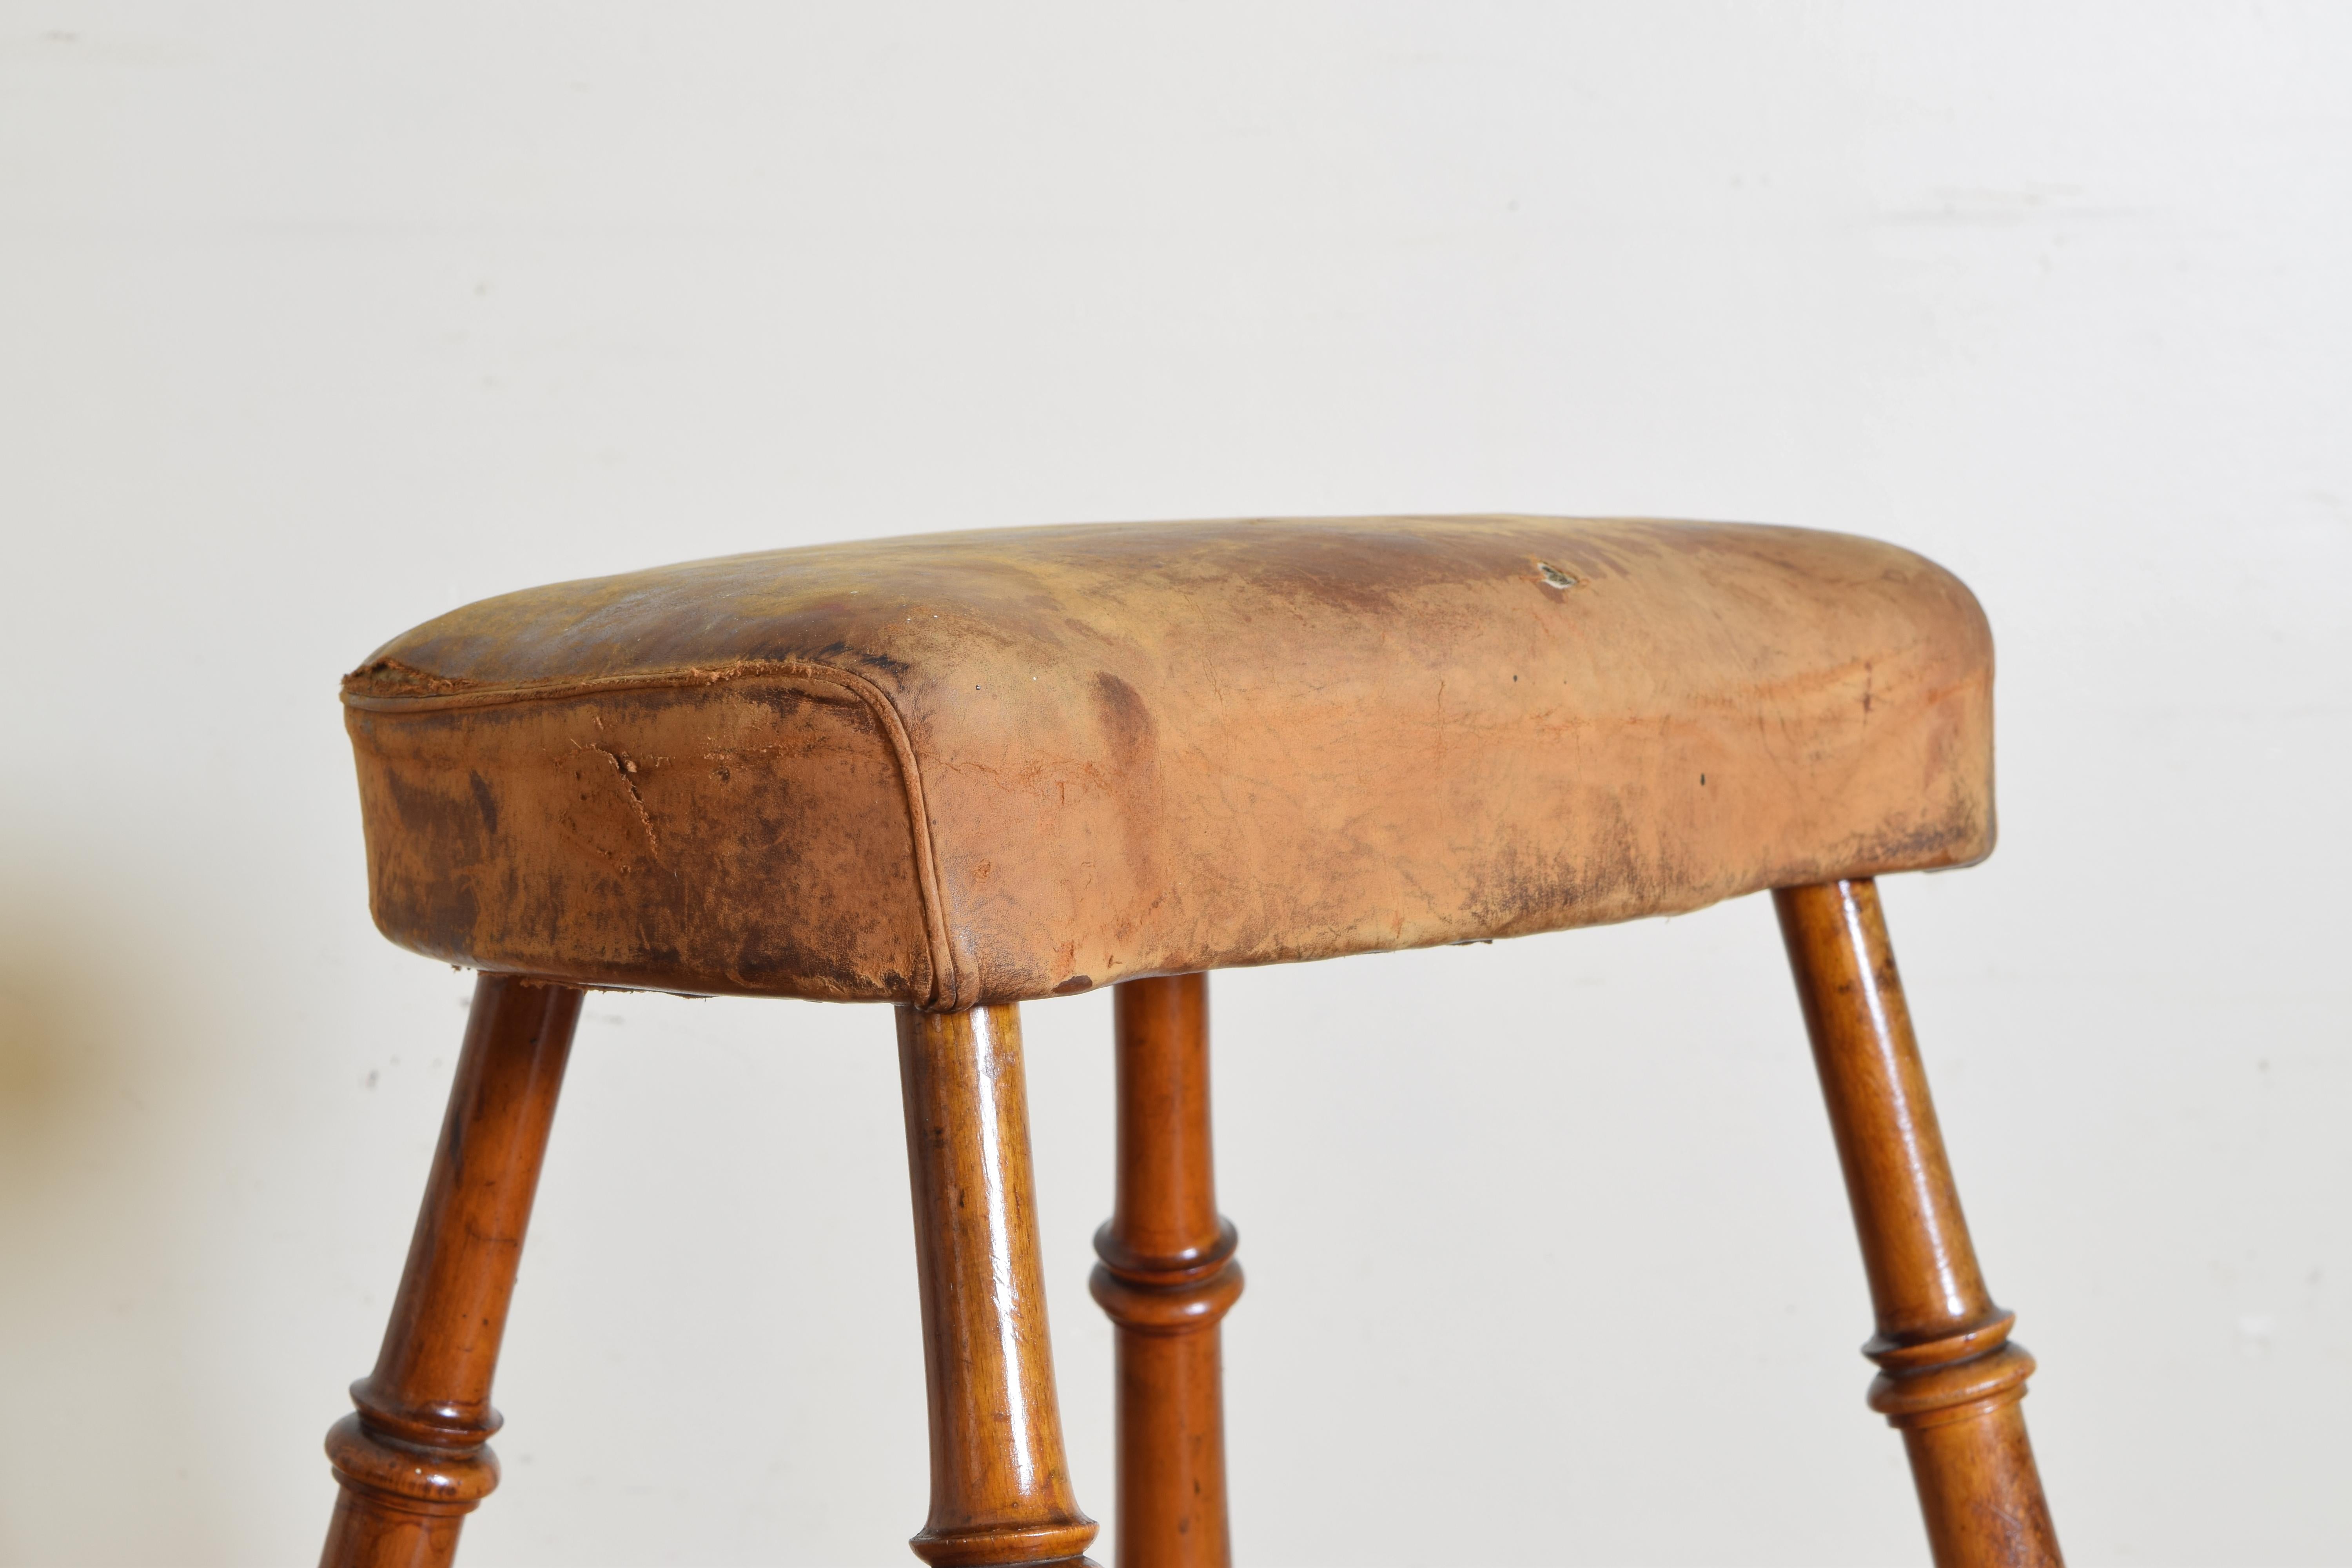 German Light Oak and Leather Upholstered Tall Stool, Mid-19th Century 1